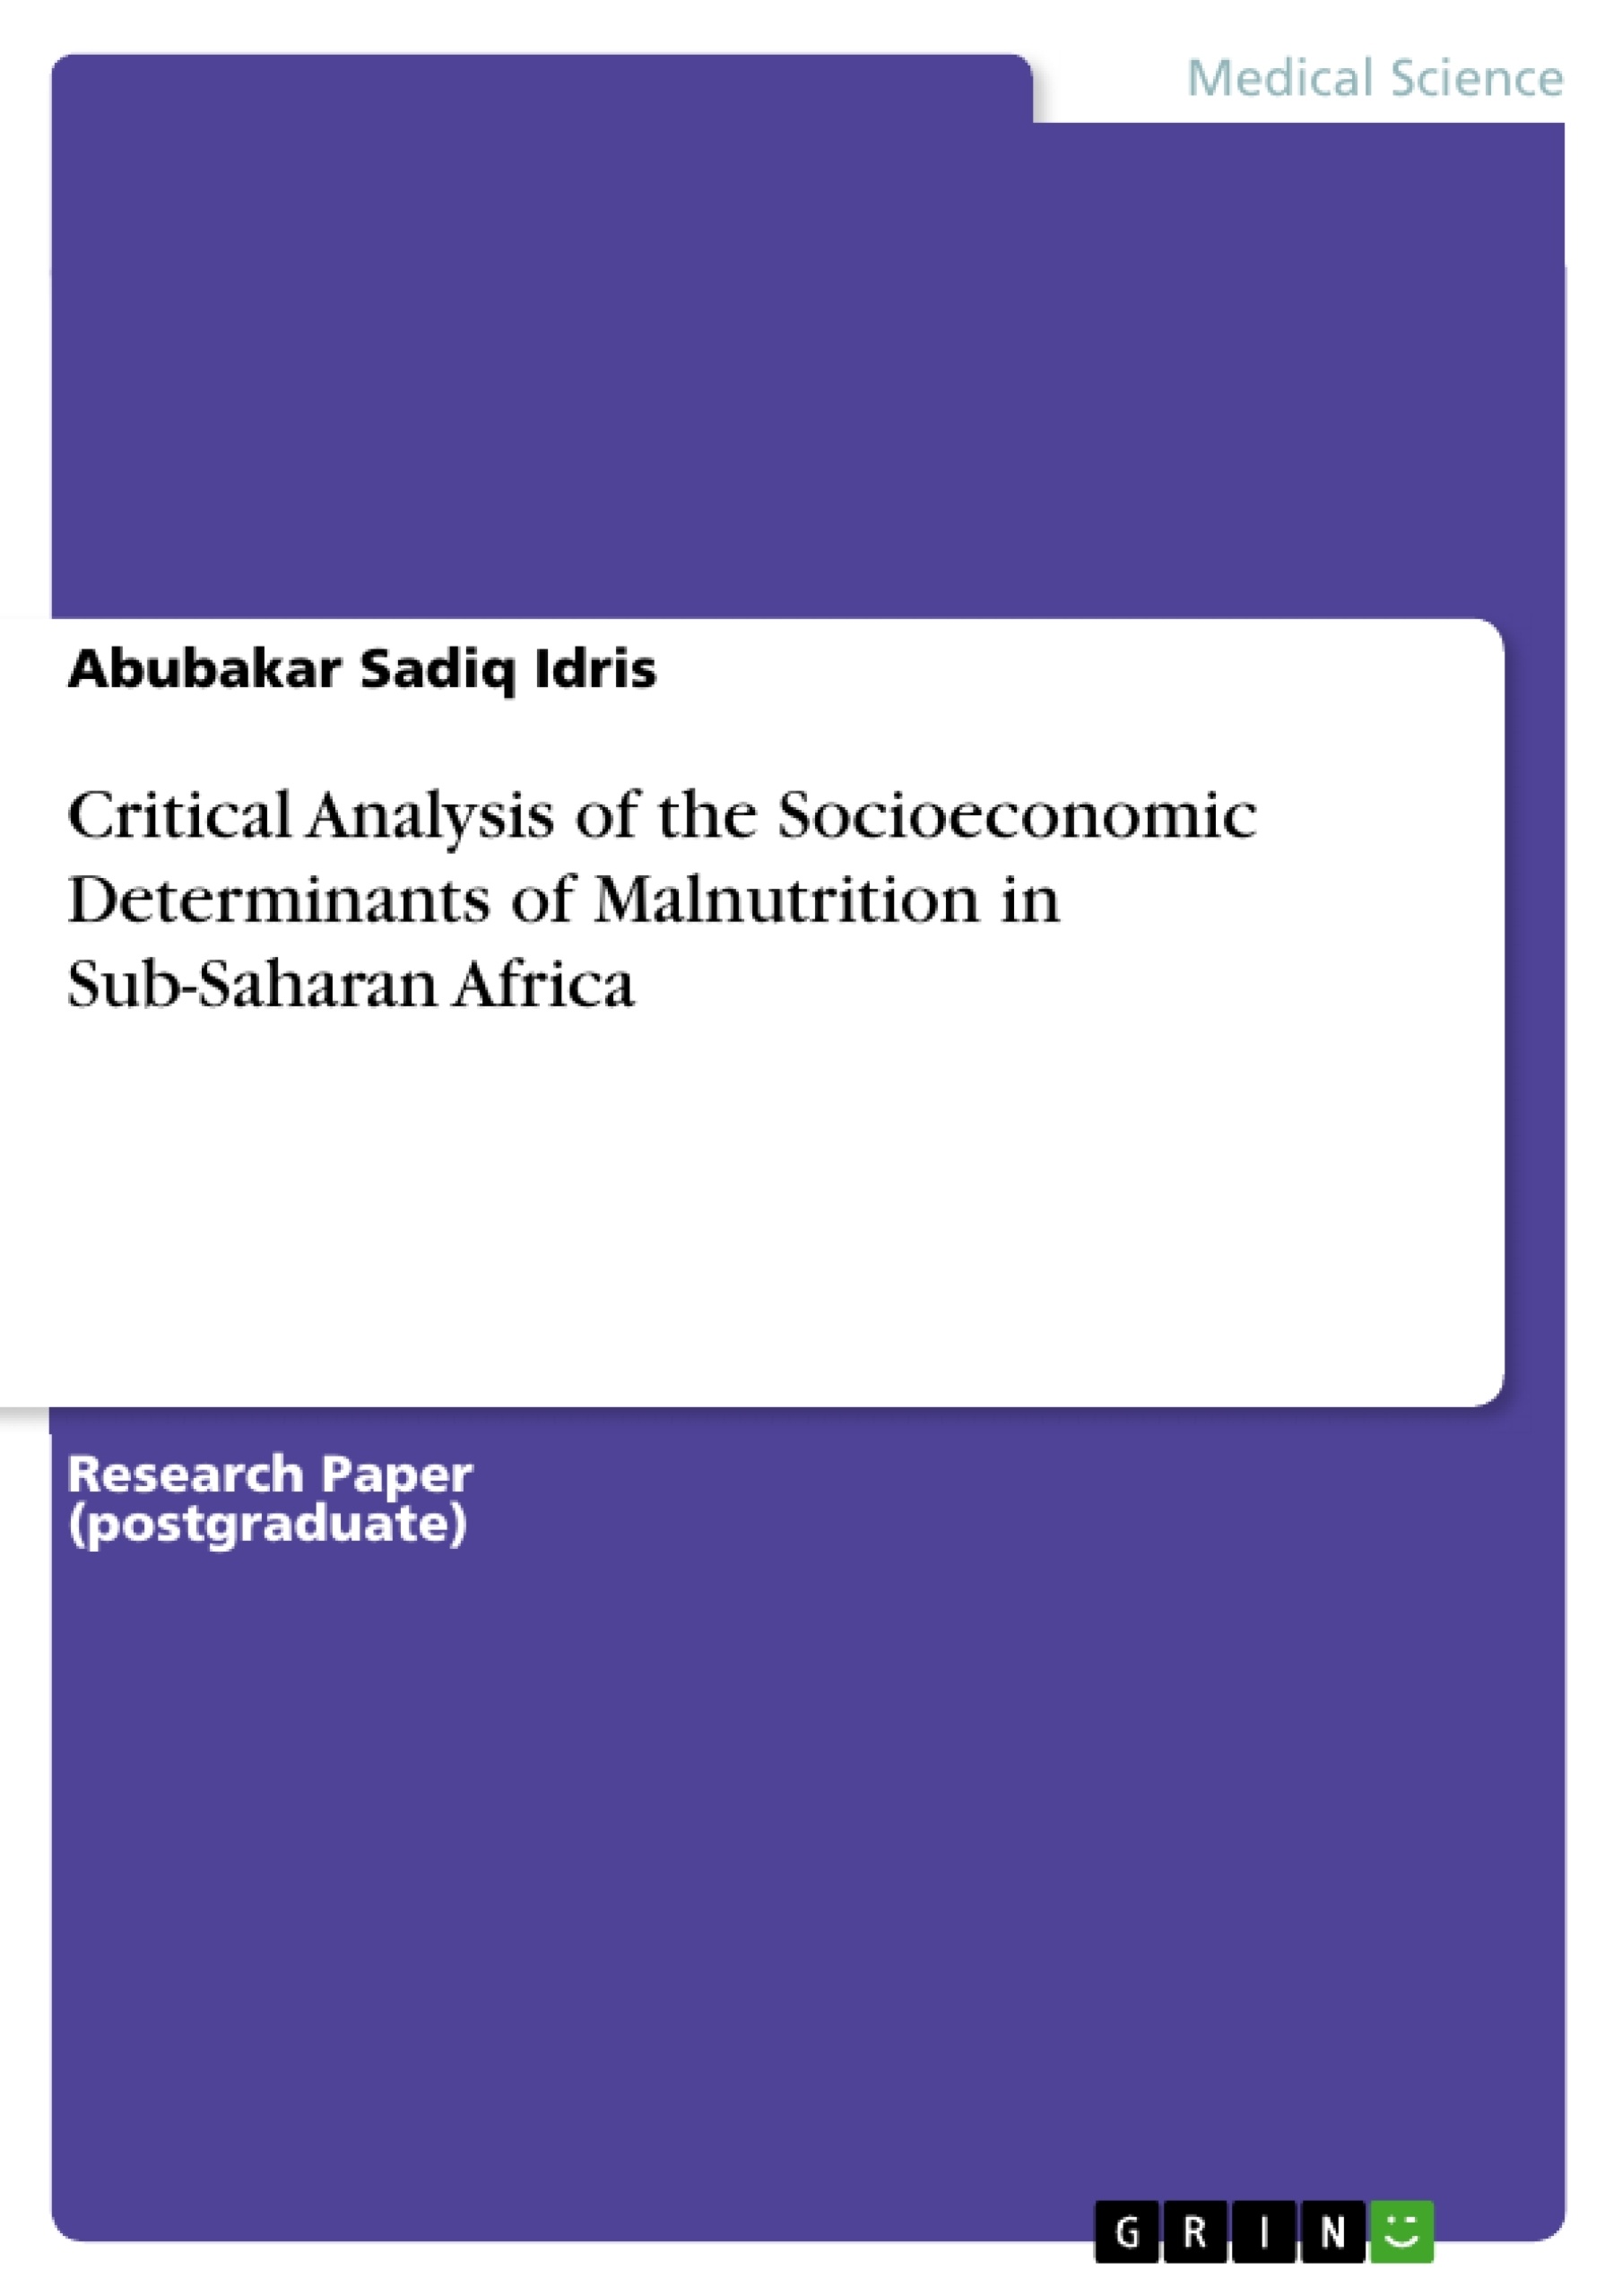 Título: Critical Analysis of the Socioeconomic Determinants of Malnutrition in Sub-Saharan Africa